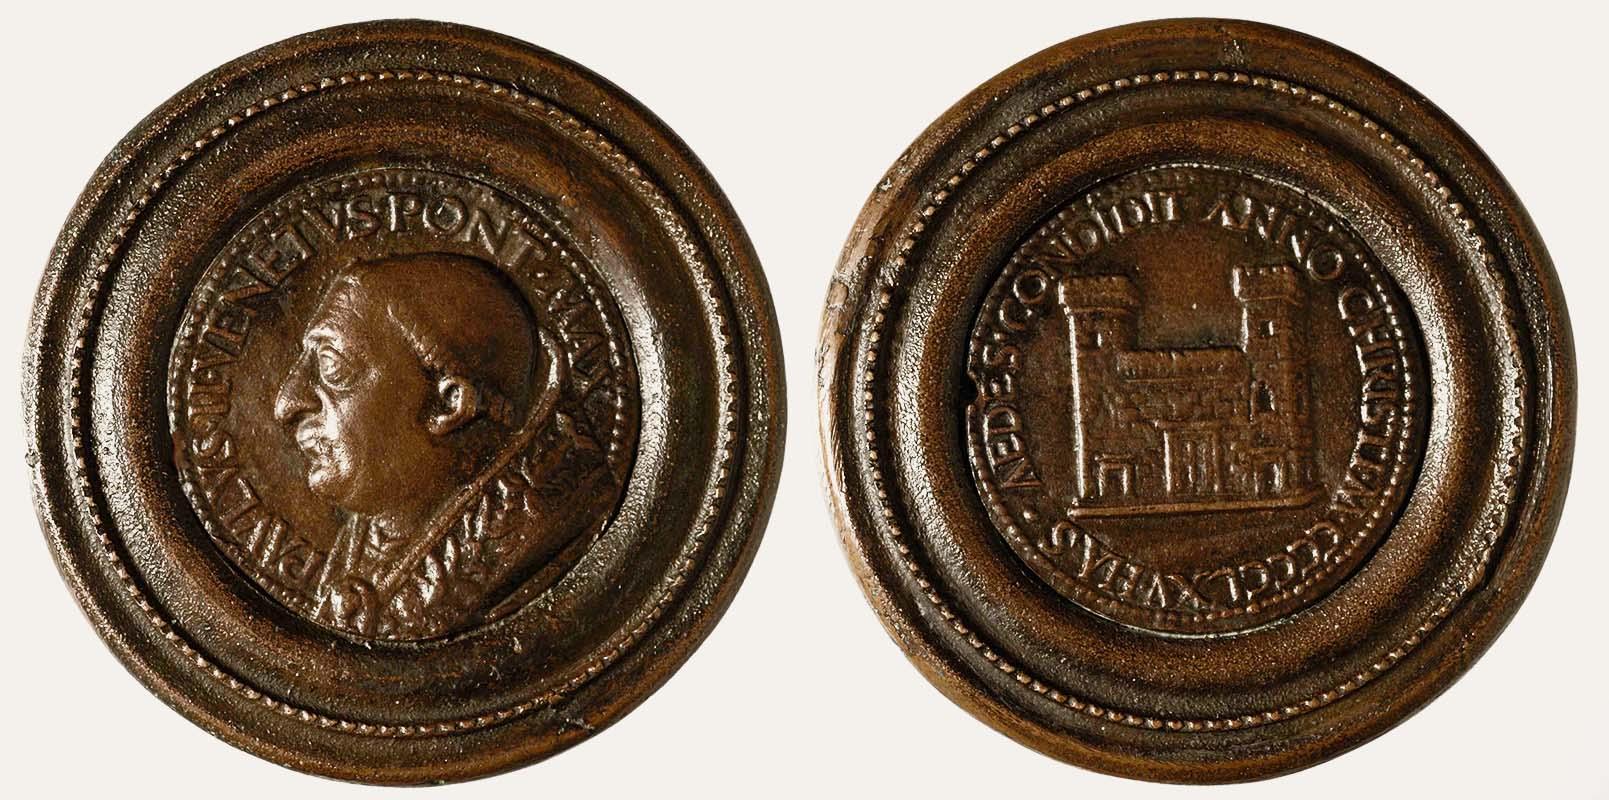 Encircled medal of Pope Paul II for the completion of Palazzo Venezia in 1465, on display in the Barbo Apartments
